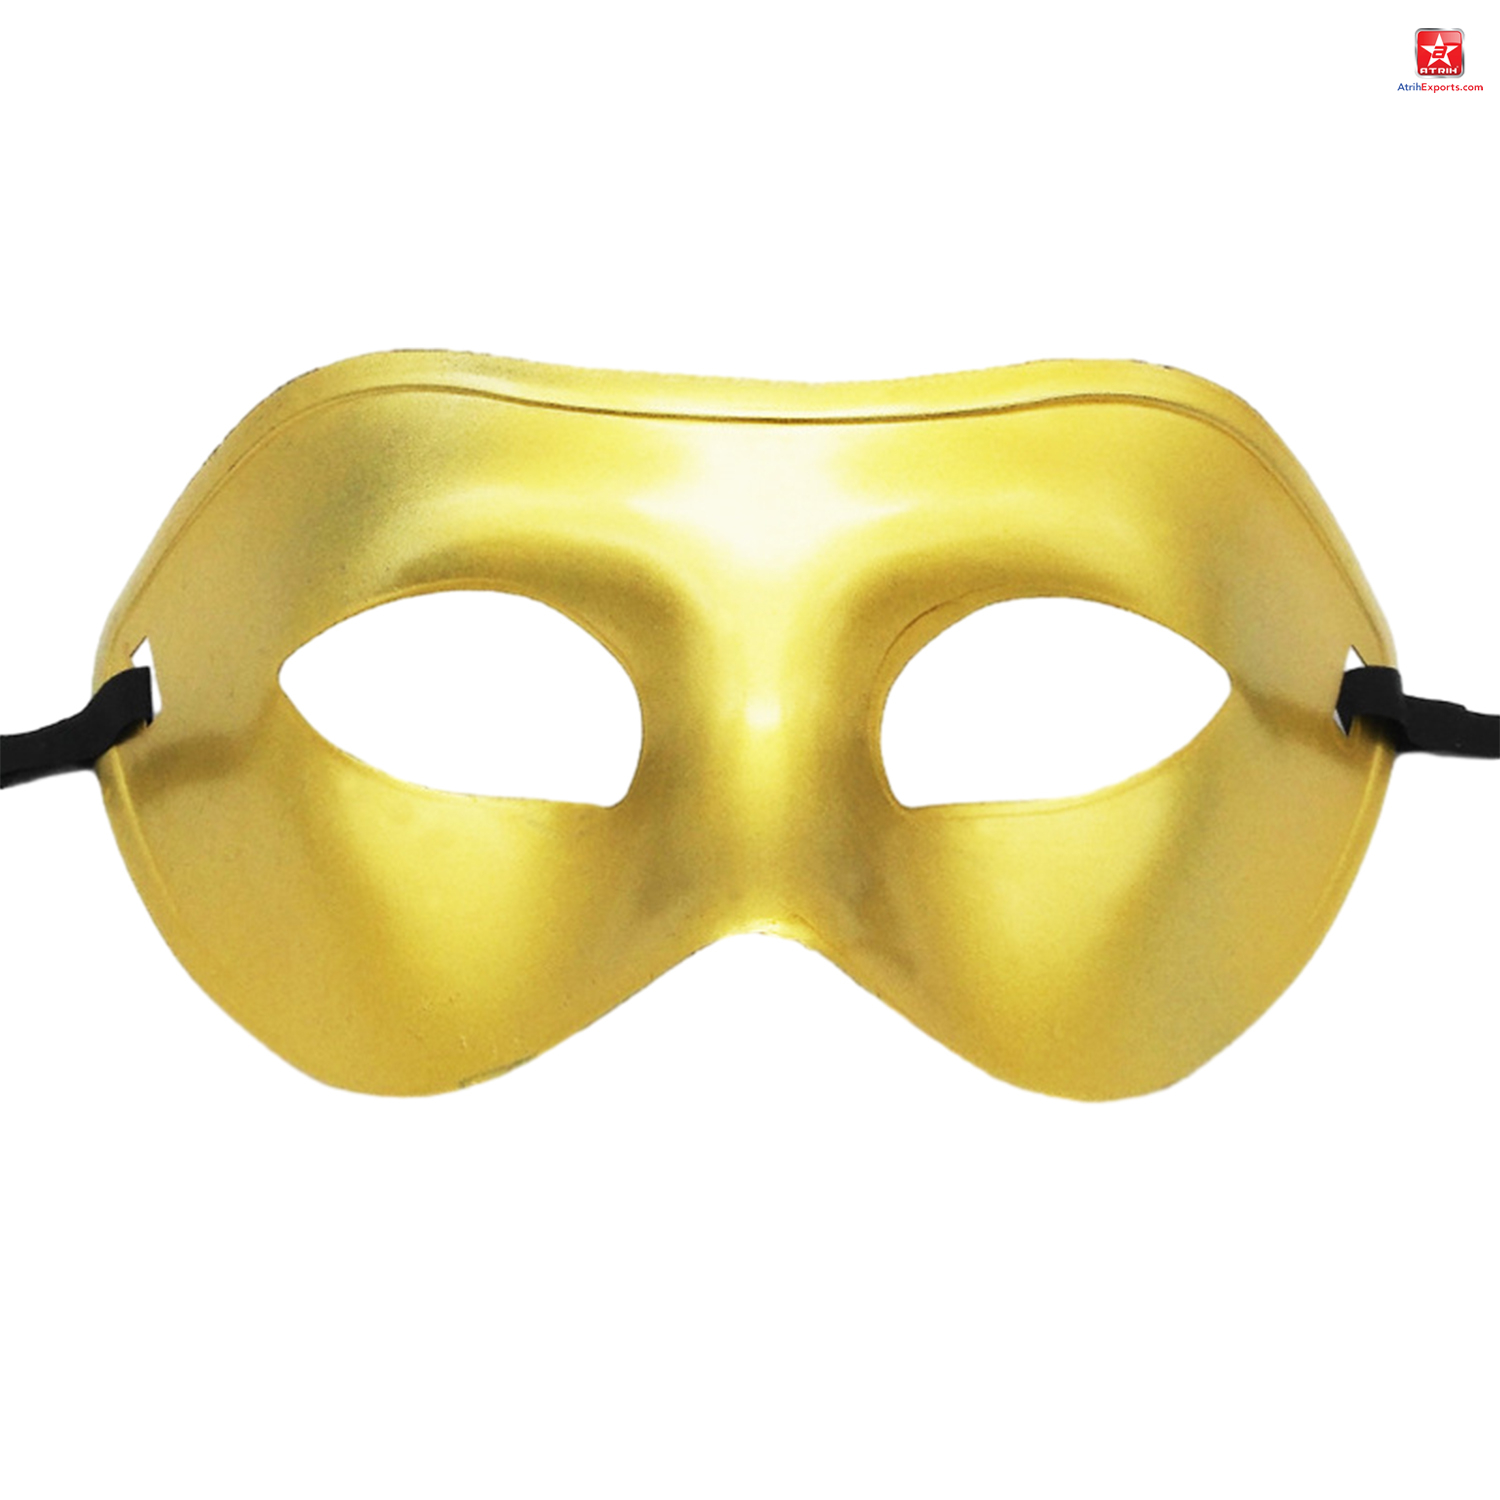 Festival Decoration Half Face Mask The Halloween Party Performs Masquerade Fairy Masks